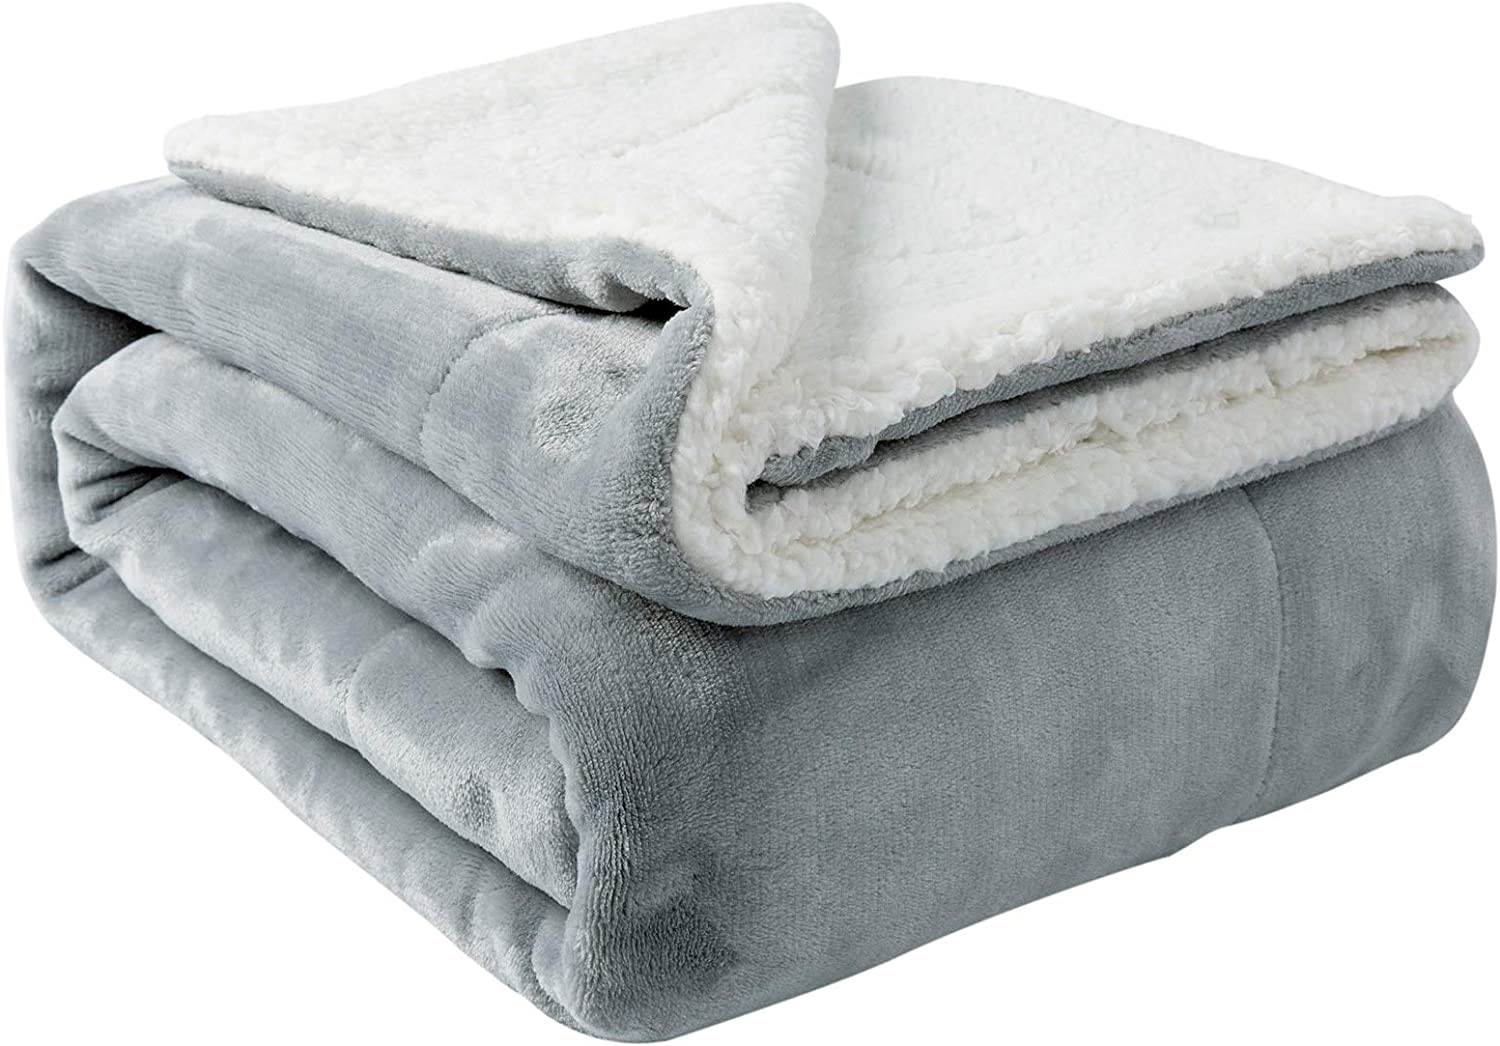 NANPIPER Sherpa Blanket Twin Thick Warm Blanket for Winter Bed